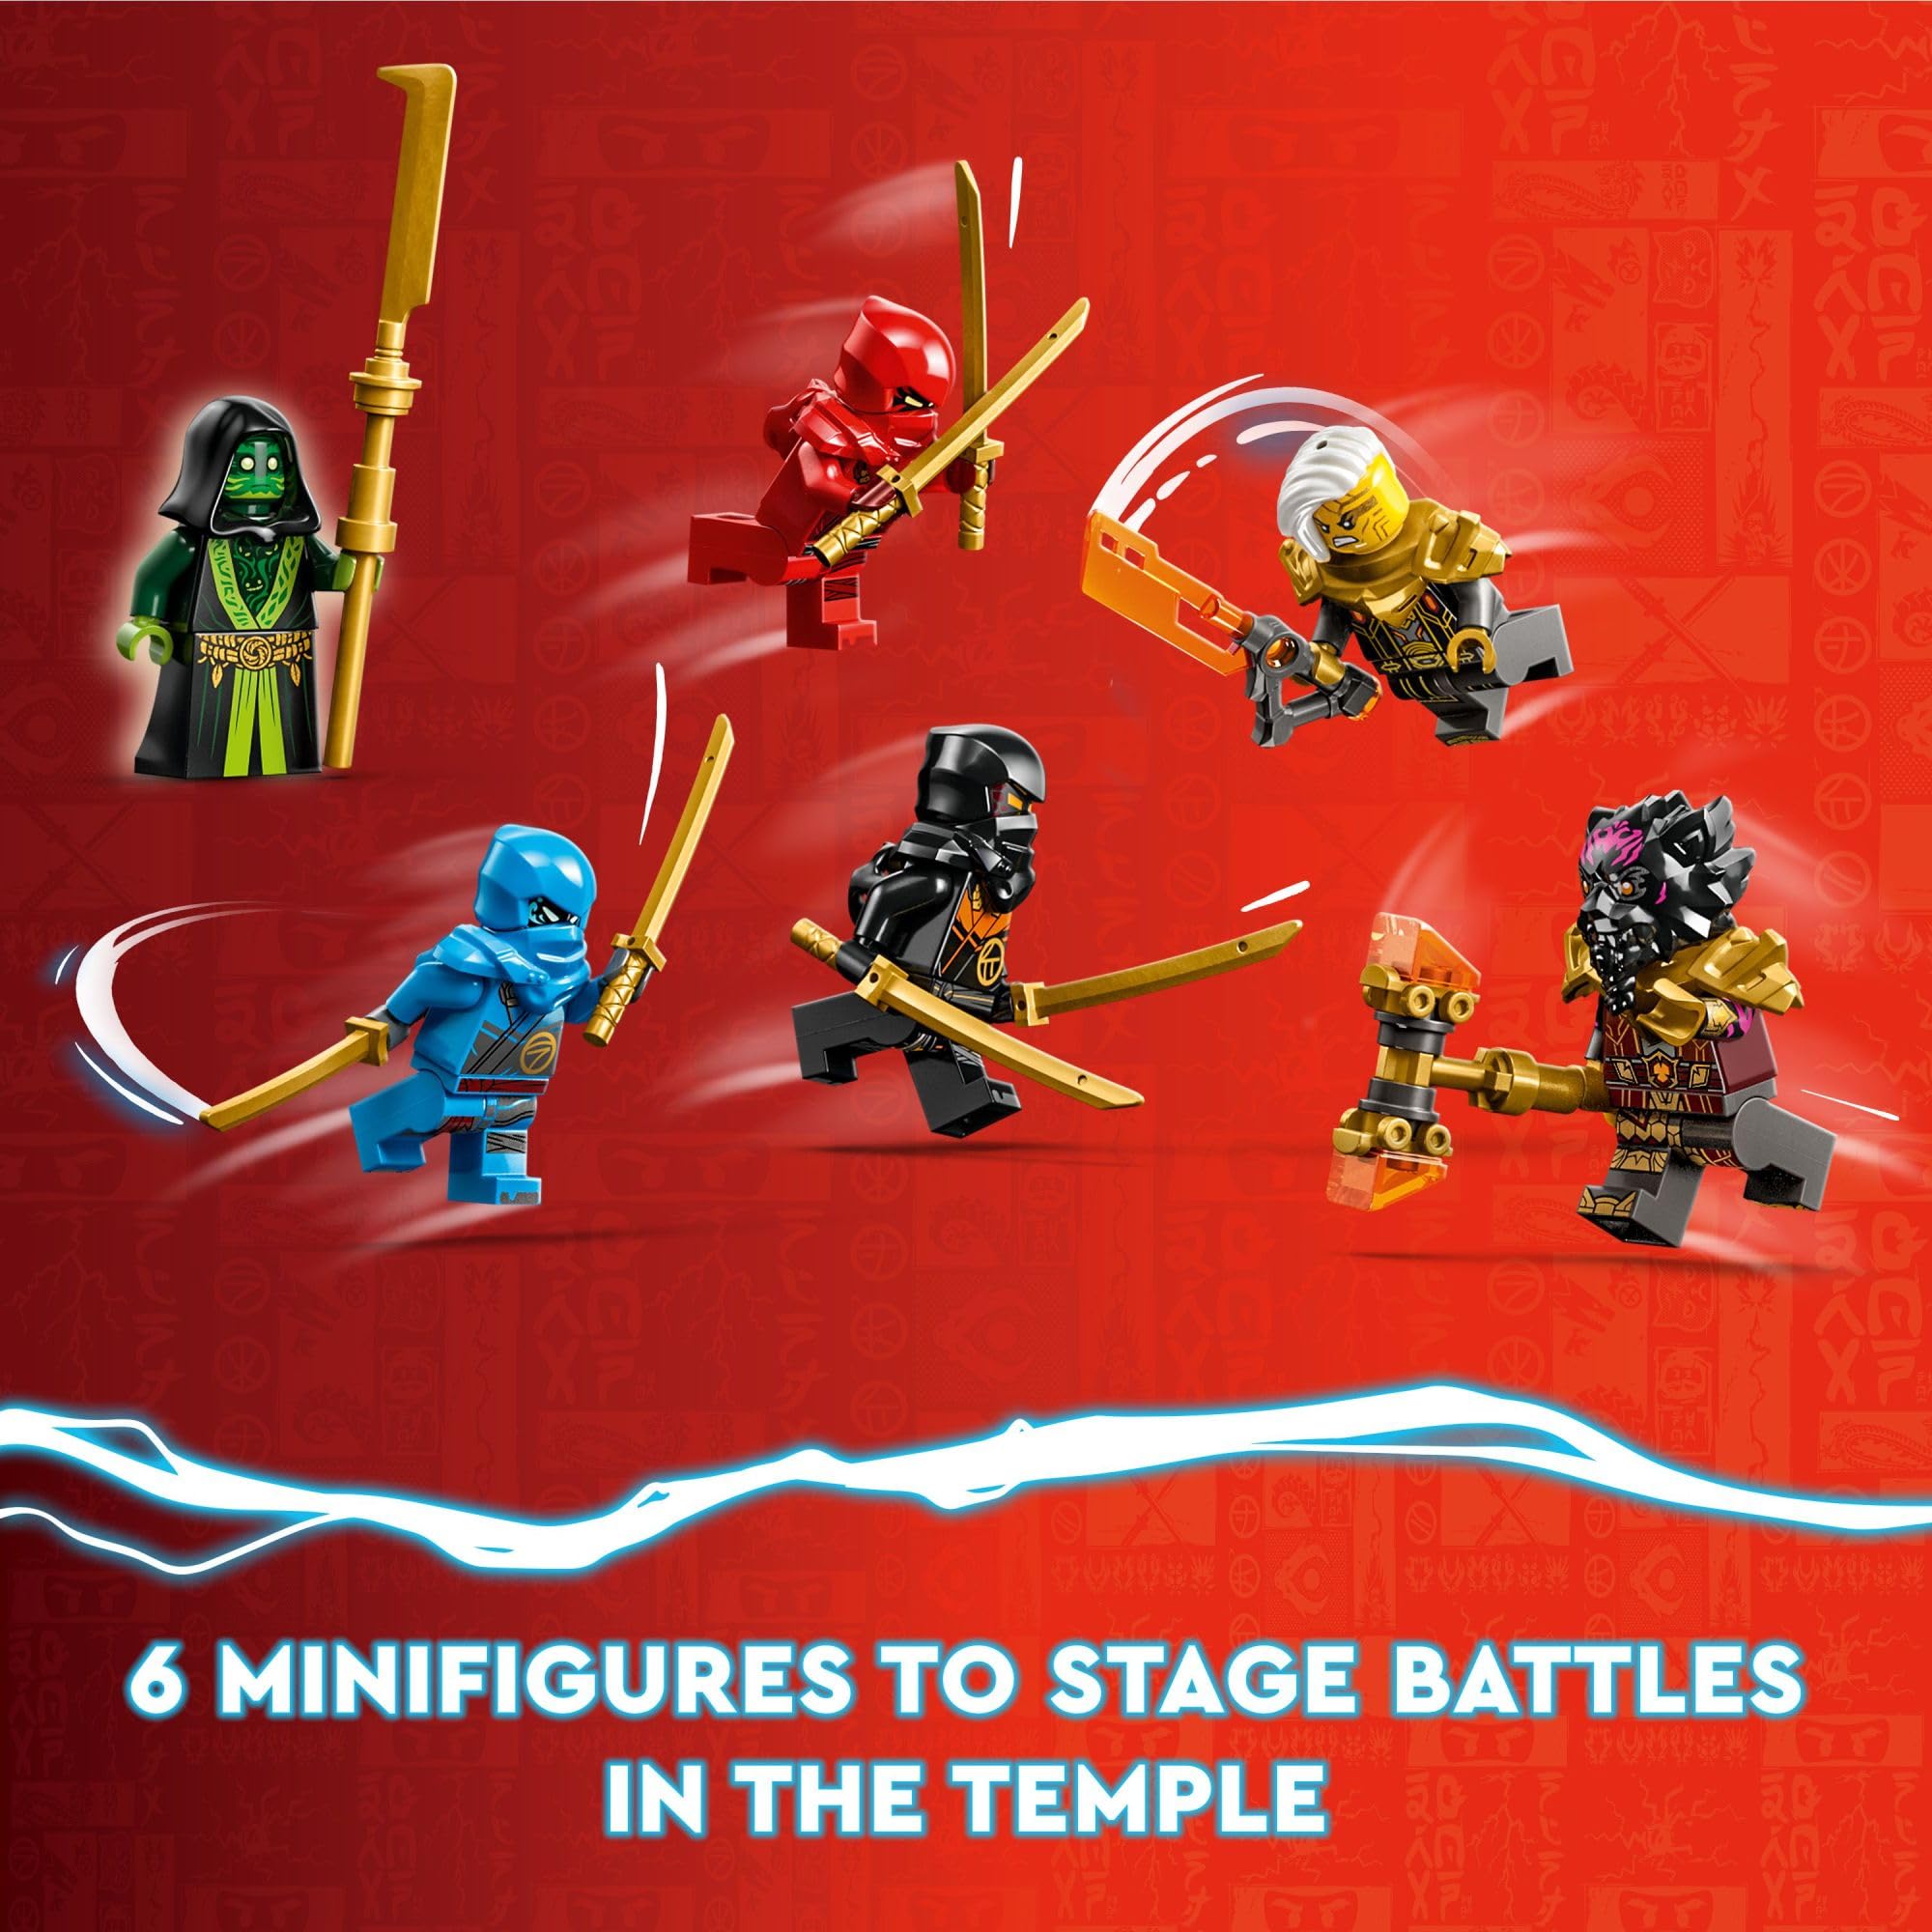 LEGO NINJAGO Temple of The Dragon Energy Cores 71795, Building Toy with a NINJAGO Temple and 6 Minifigures Including Cole, Kai and NYA' Gift for Kids Ages 8+ Who Love Buildable Ninja Playsets